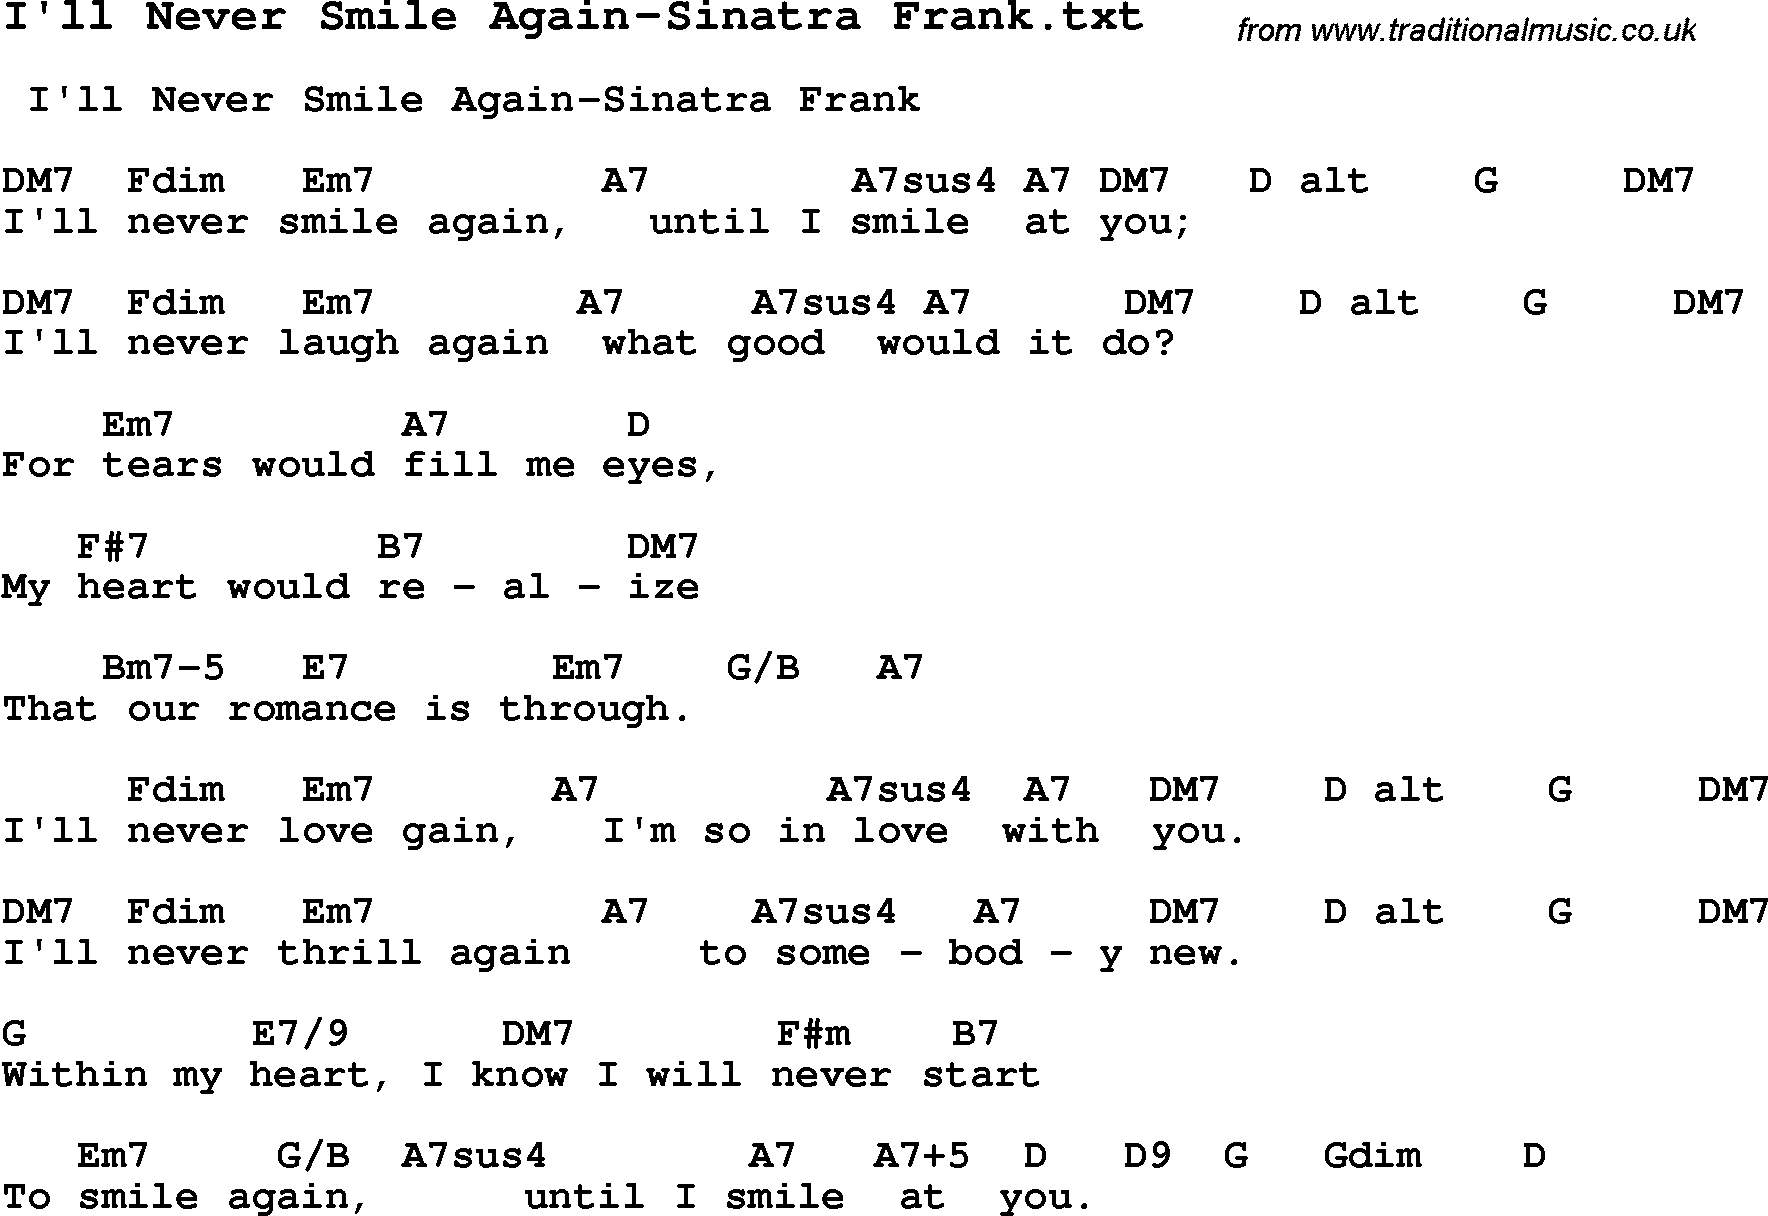 Jazz Song from top bands and vocal artists with chords, tabs and lyrics - I'll Never Smile Again-Sinatra Frank